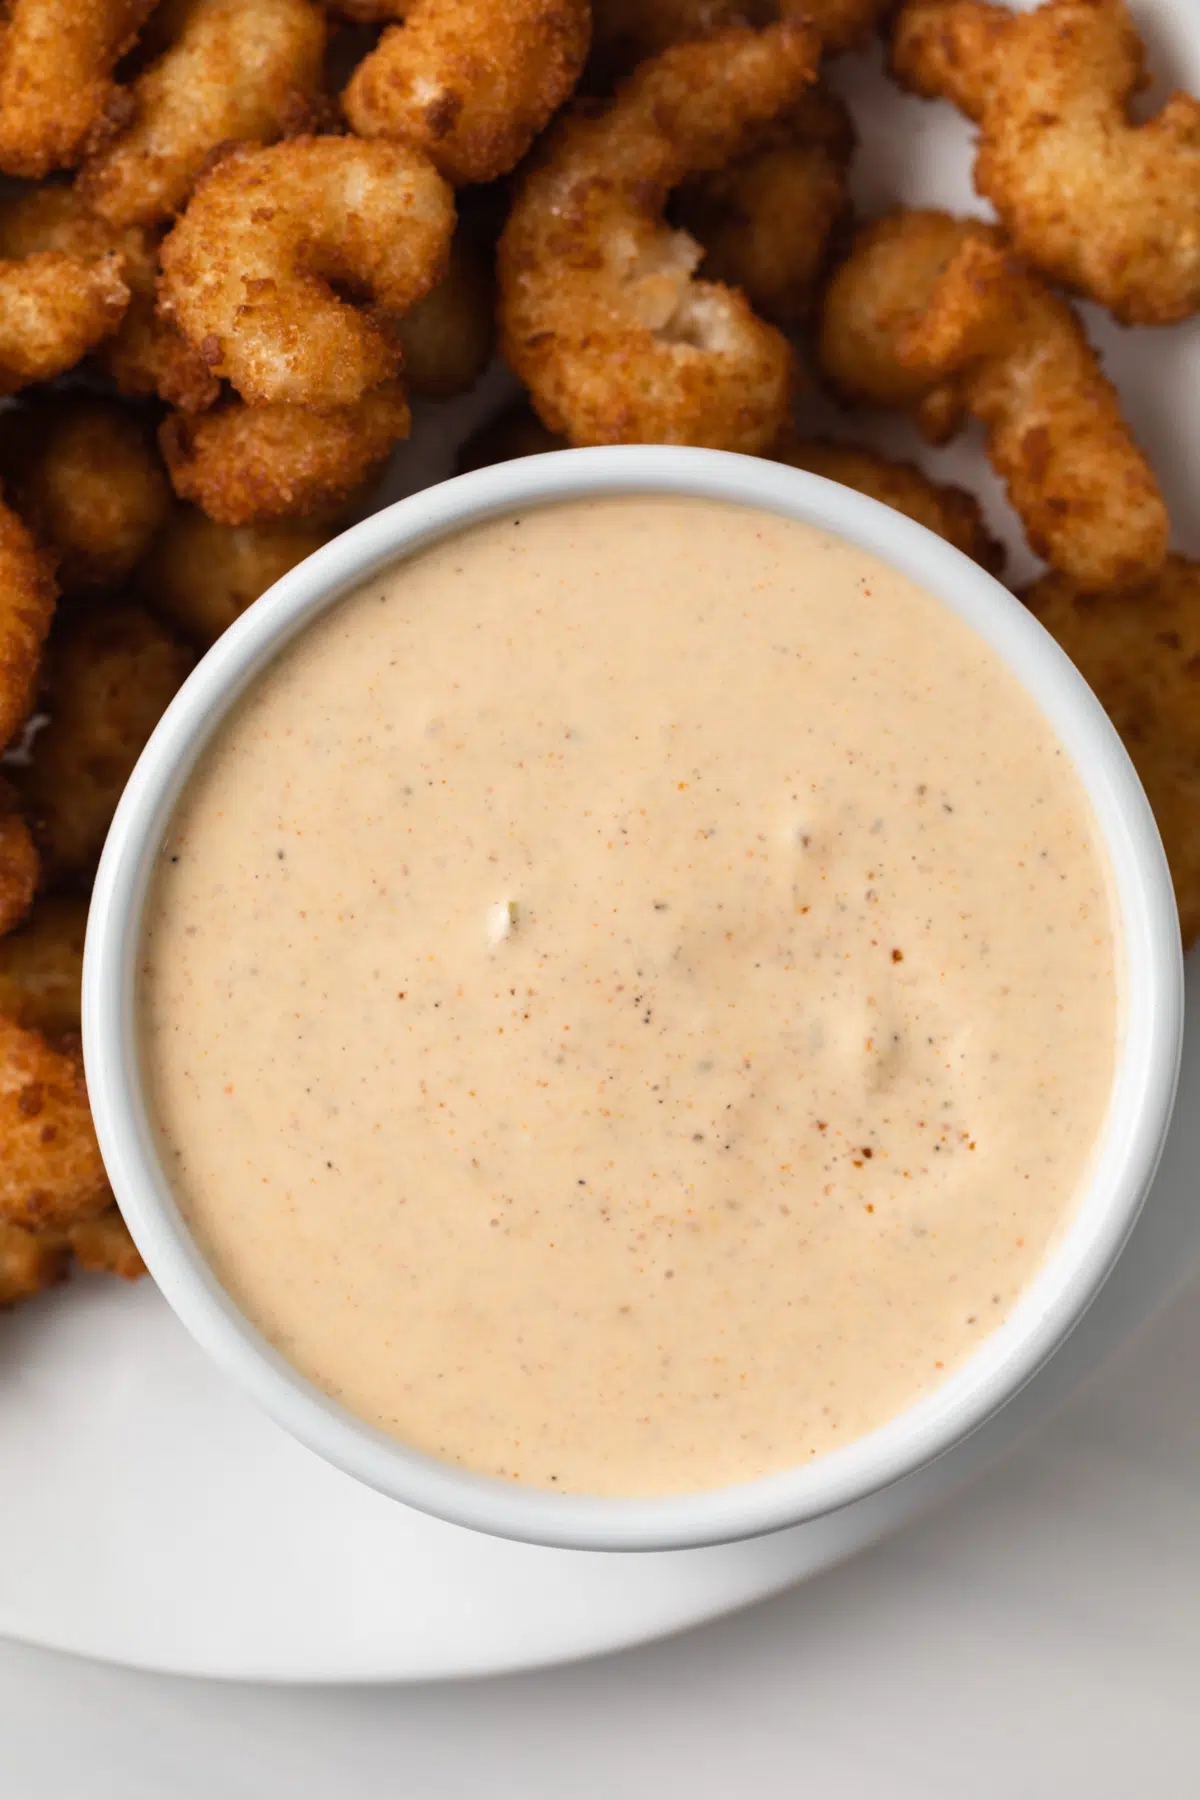 Bowl of remoulade sauce.